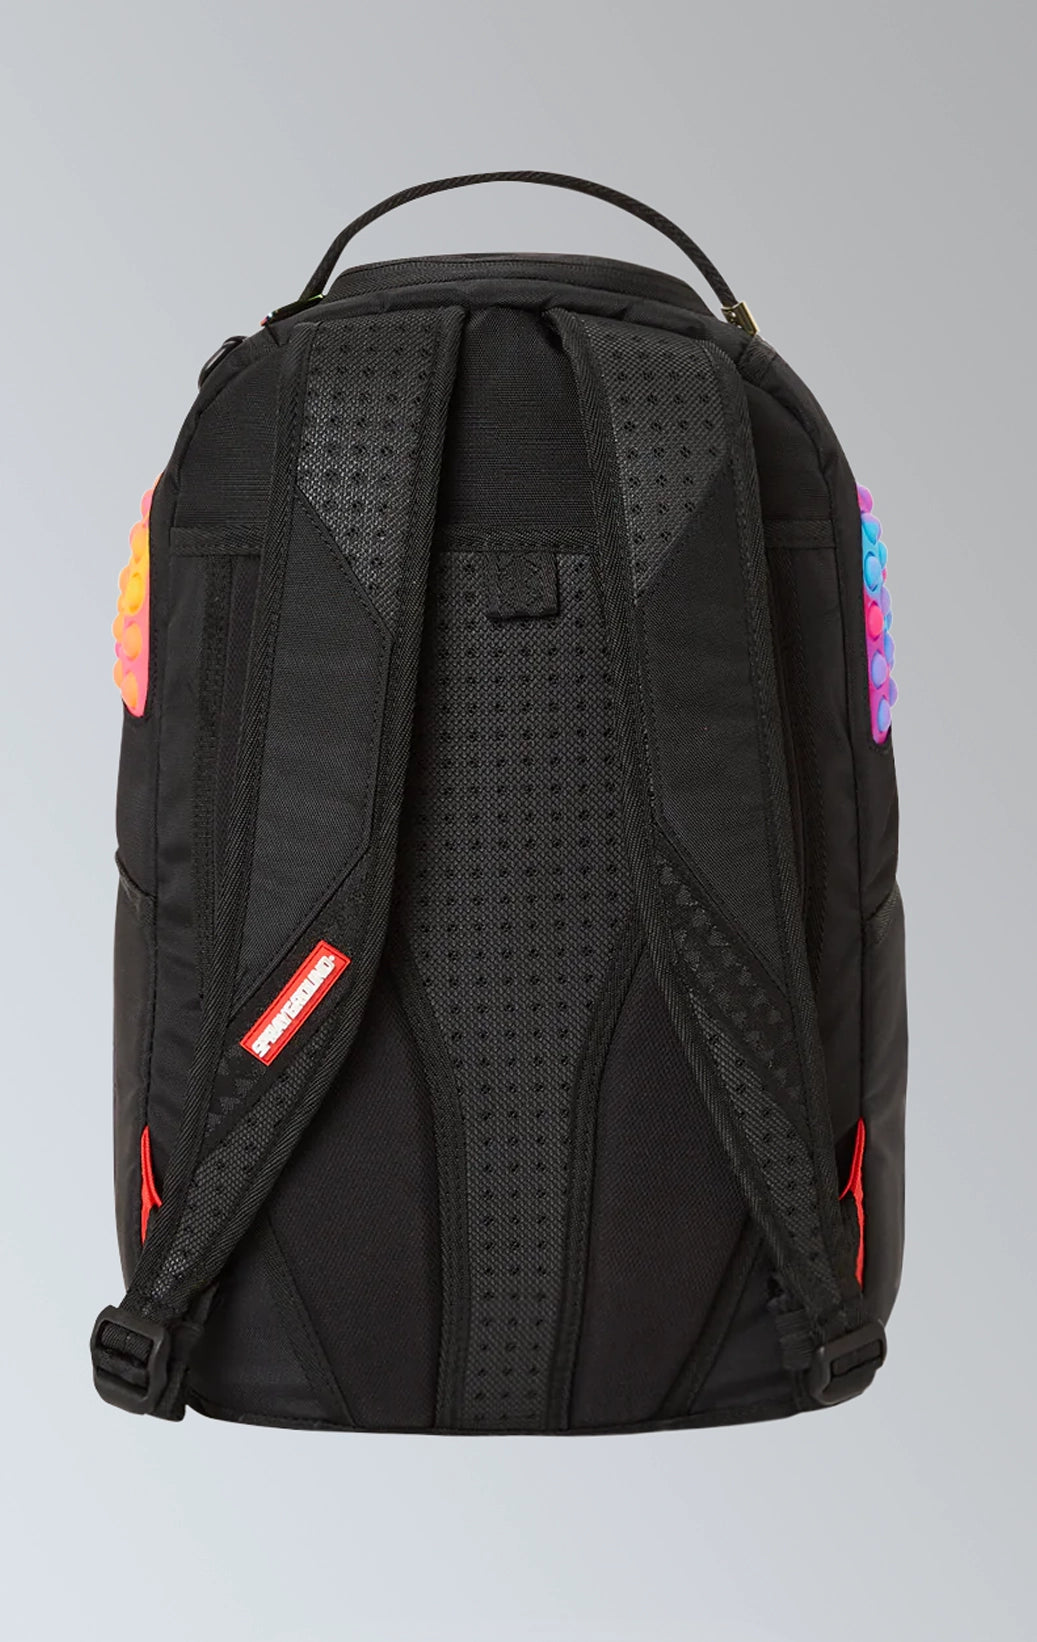 Backpack with pop rubber